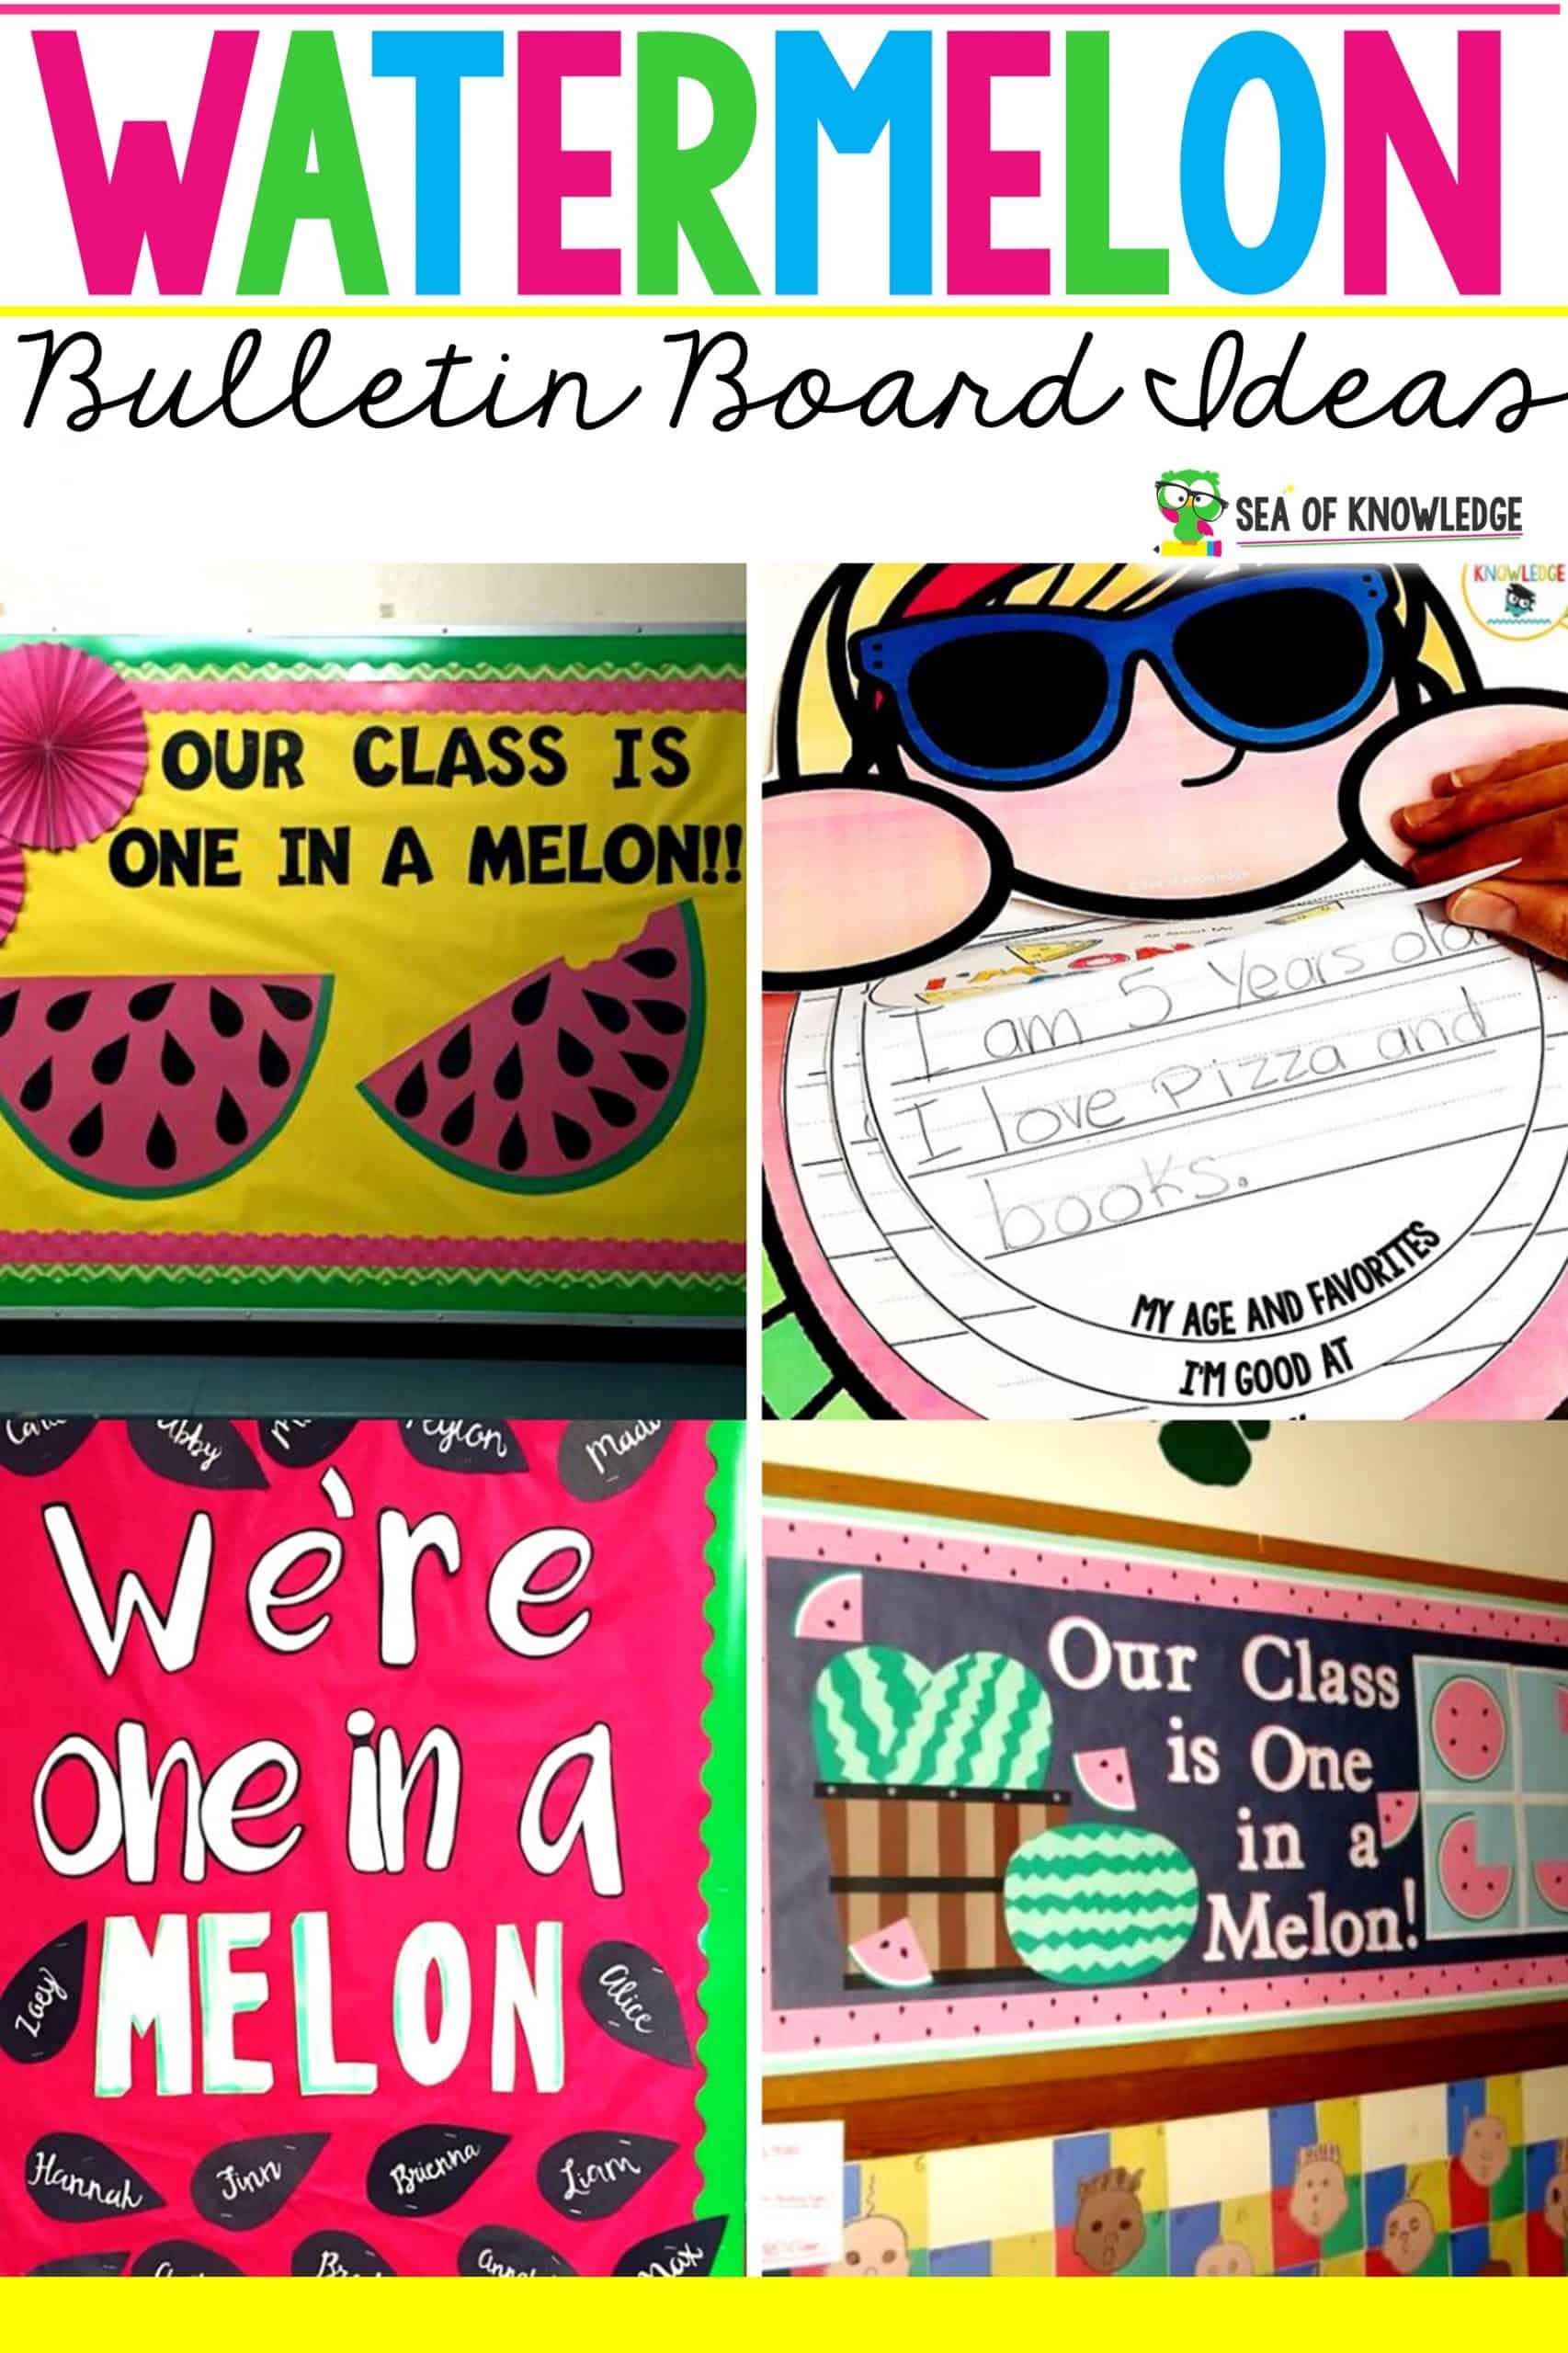 Looking for some super cute watermelon bulletin board ideas? Look no further, I have a set of fun ideas that you can use right at the start of school or when you return to school. I always find that the beginning of school is a cross between warm sunny days and cooler days. So a watermelon theme is so cute for that time of year, however it can be used at any time during the year.